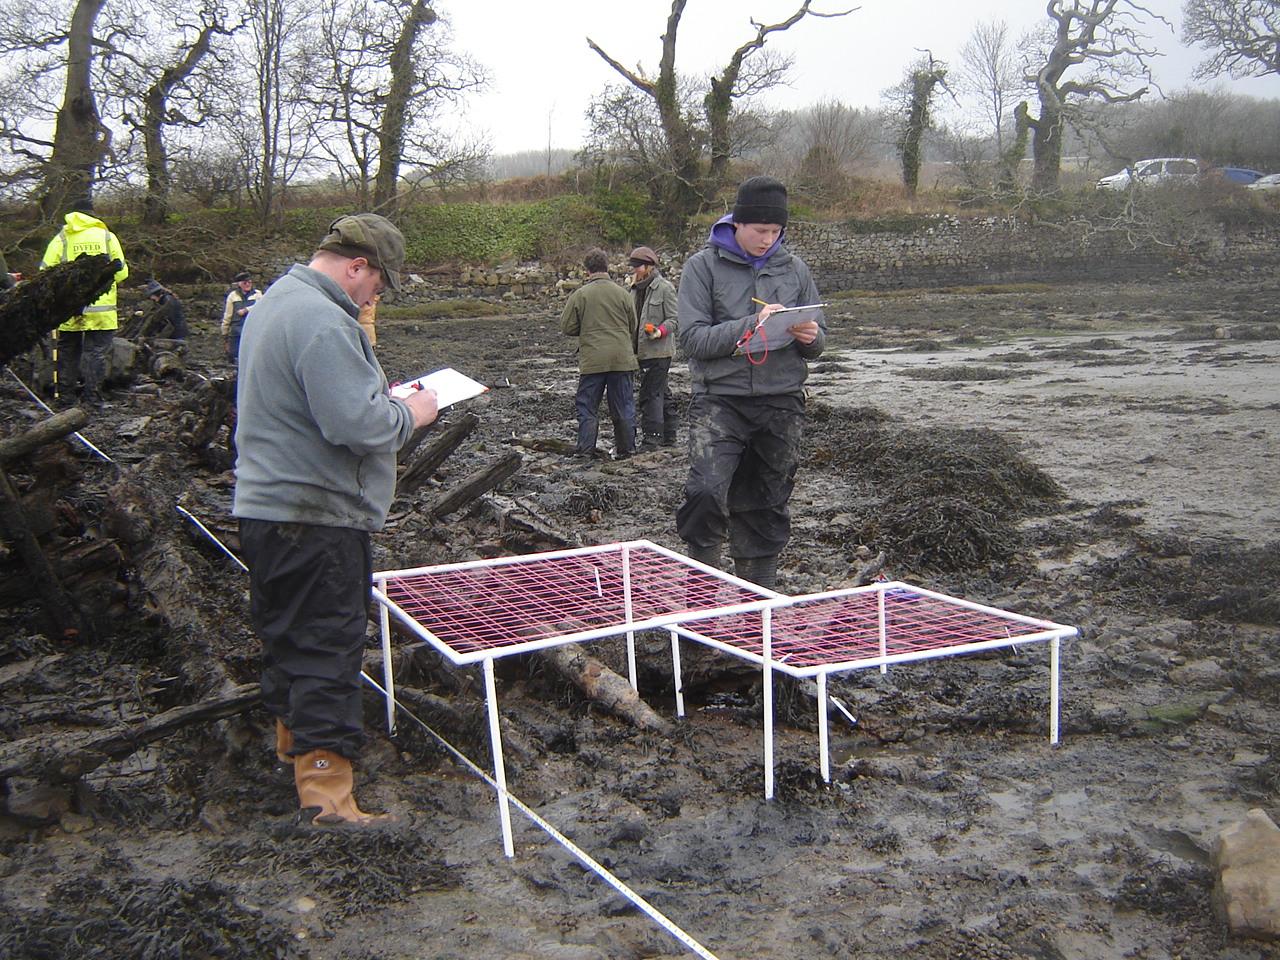 Volunteers from the Dyfed Archaeological Trust carrying out Planning Frame exercises on the wreck of the Helping Hand at Lawrenny